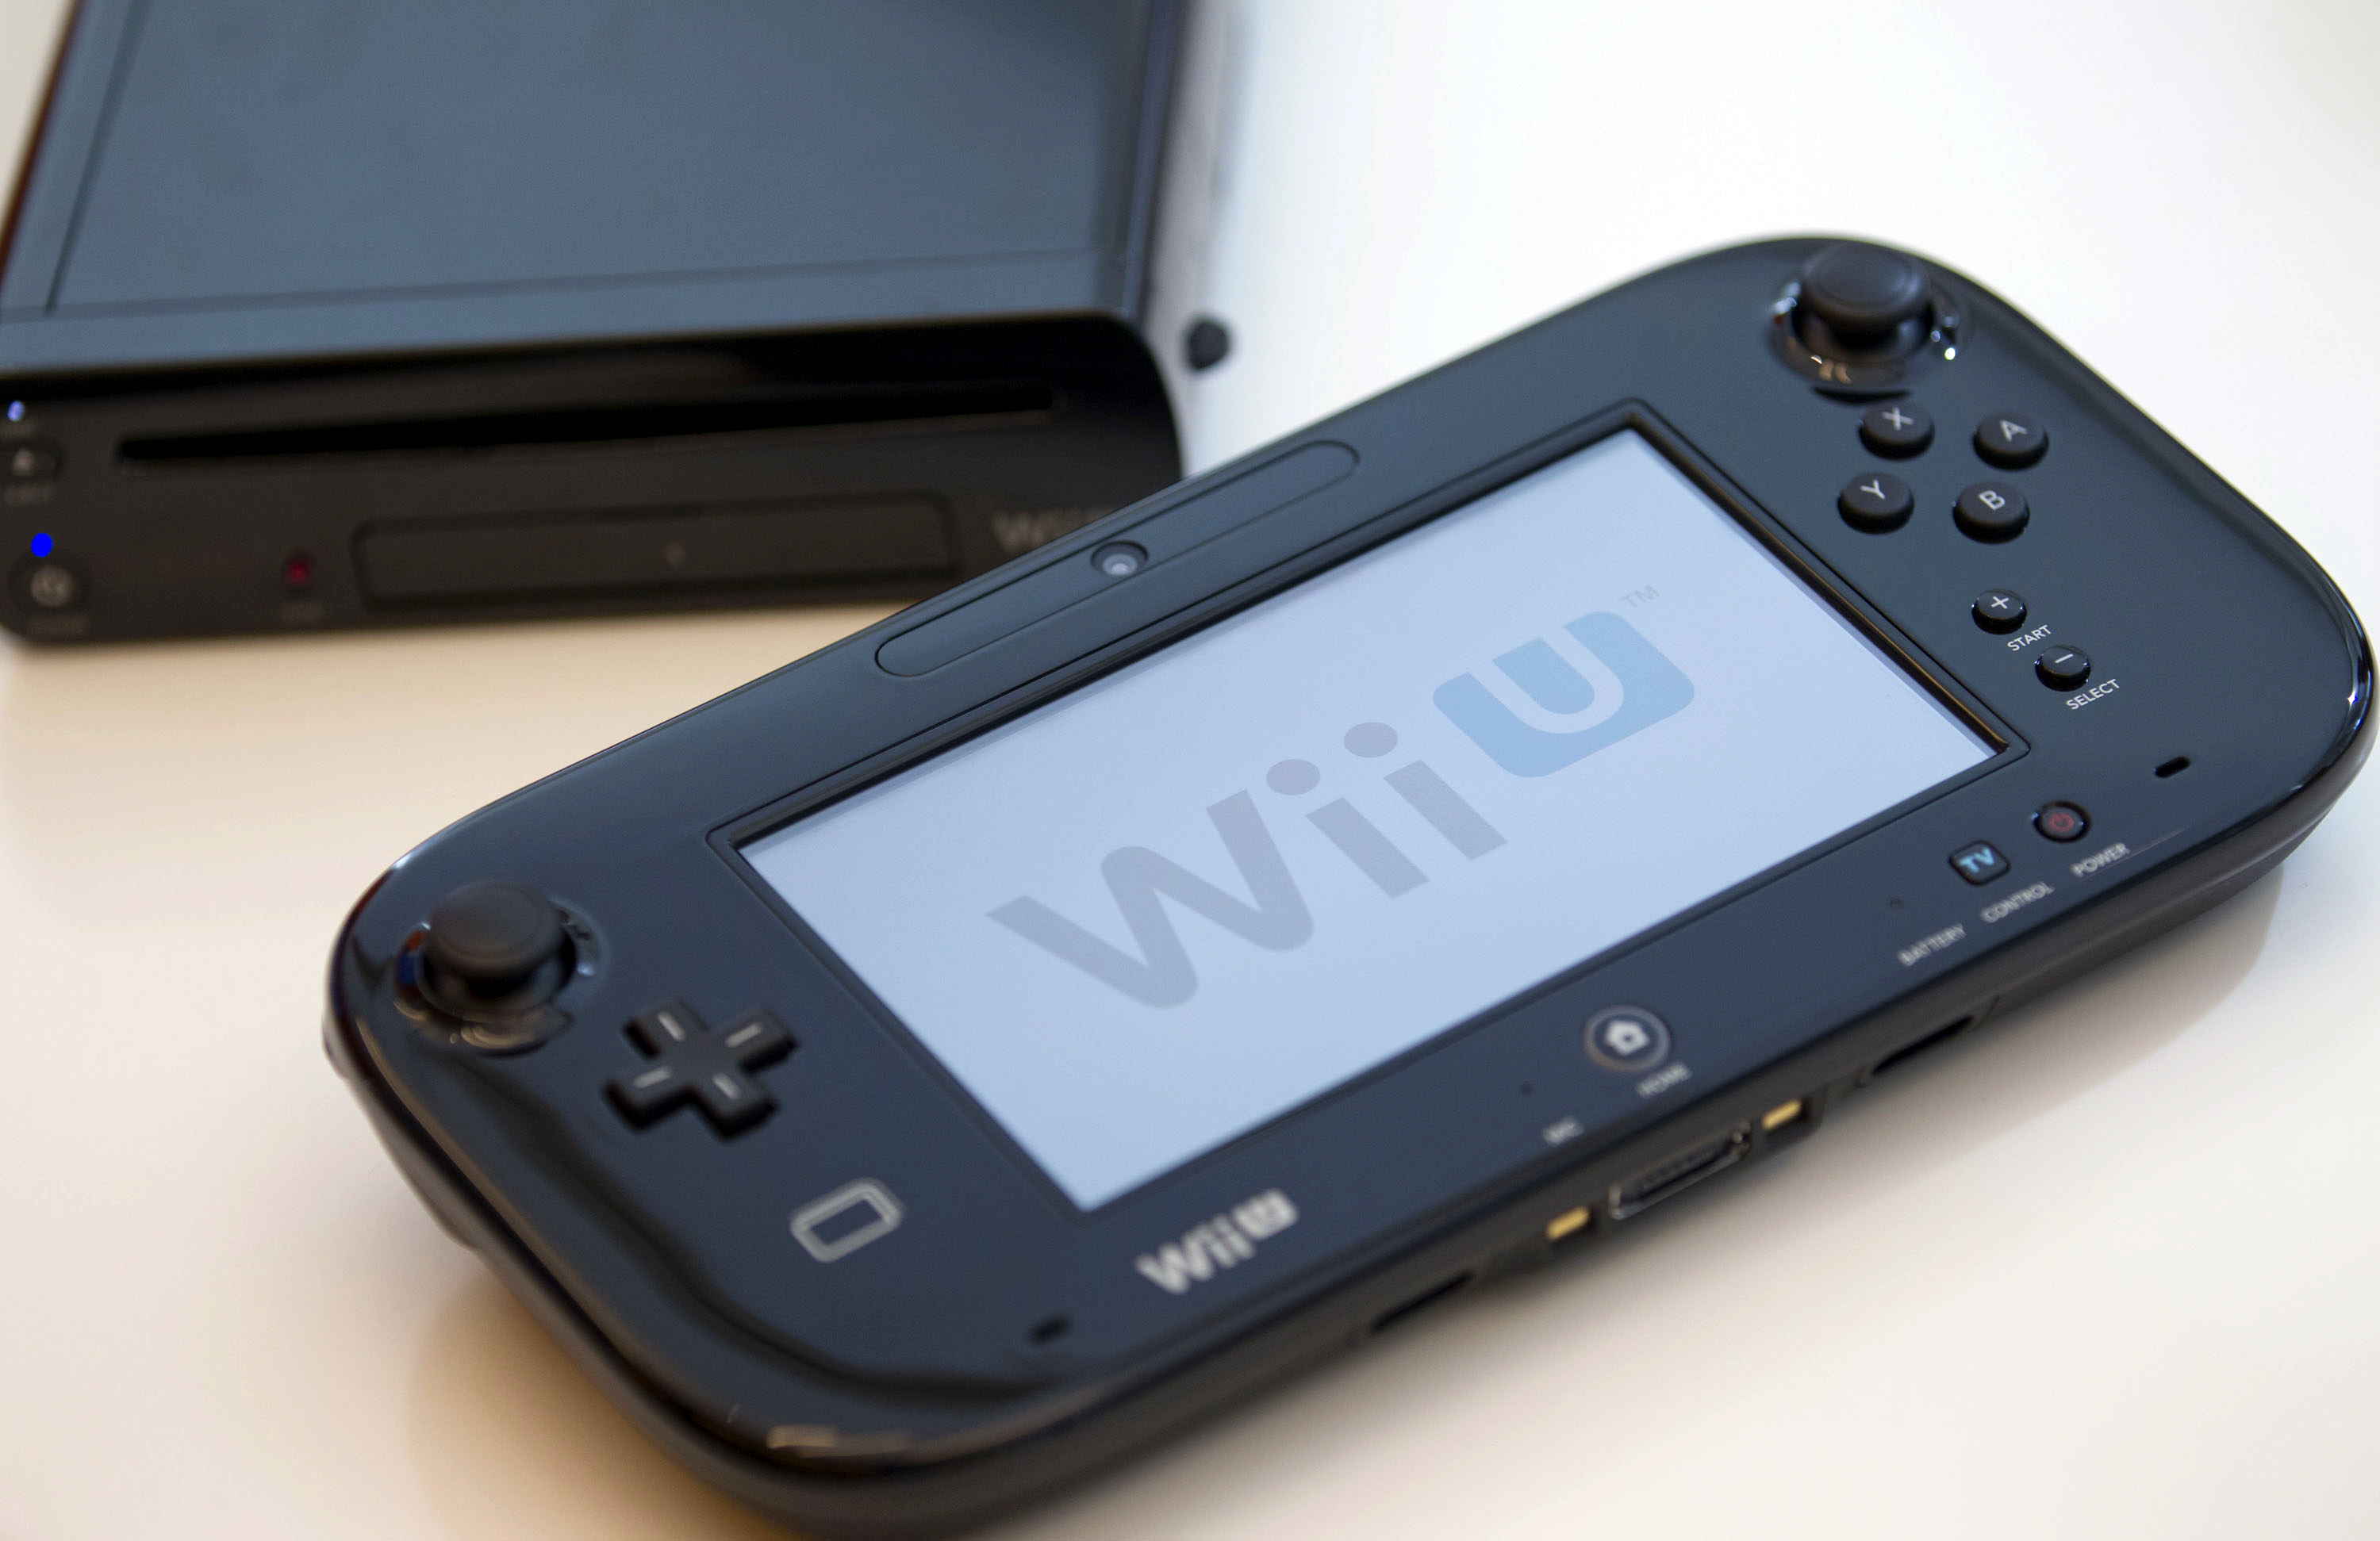 Nintendo's Wii U console, above, and touch-pad controller sit on display during an interview with Reggie Fils-Aime, president of Nintendo of America Inc., in New York, U.S., on Friday, Sept. 14, 2012. (Bloomberg—Bloomberg via Getty Images)